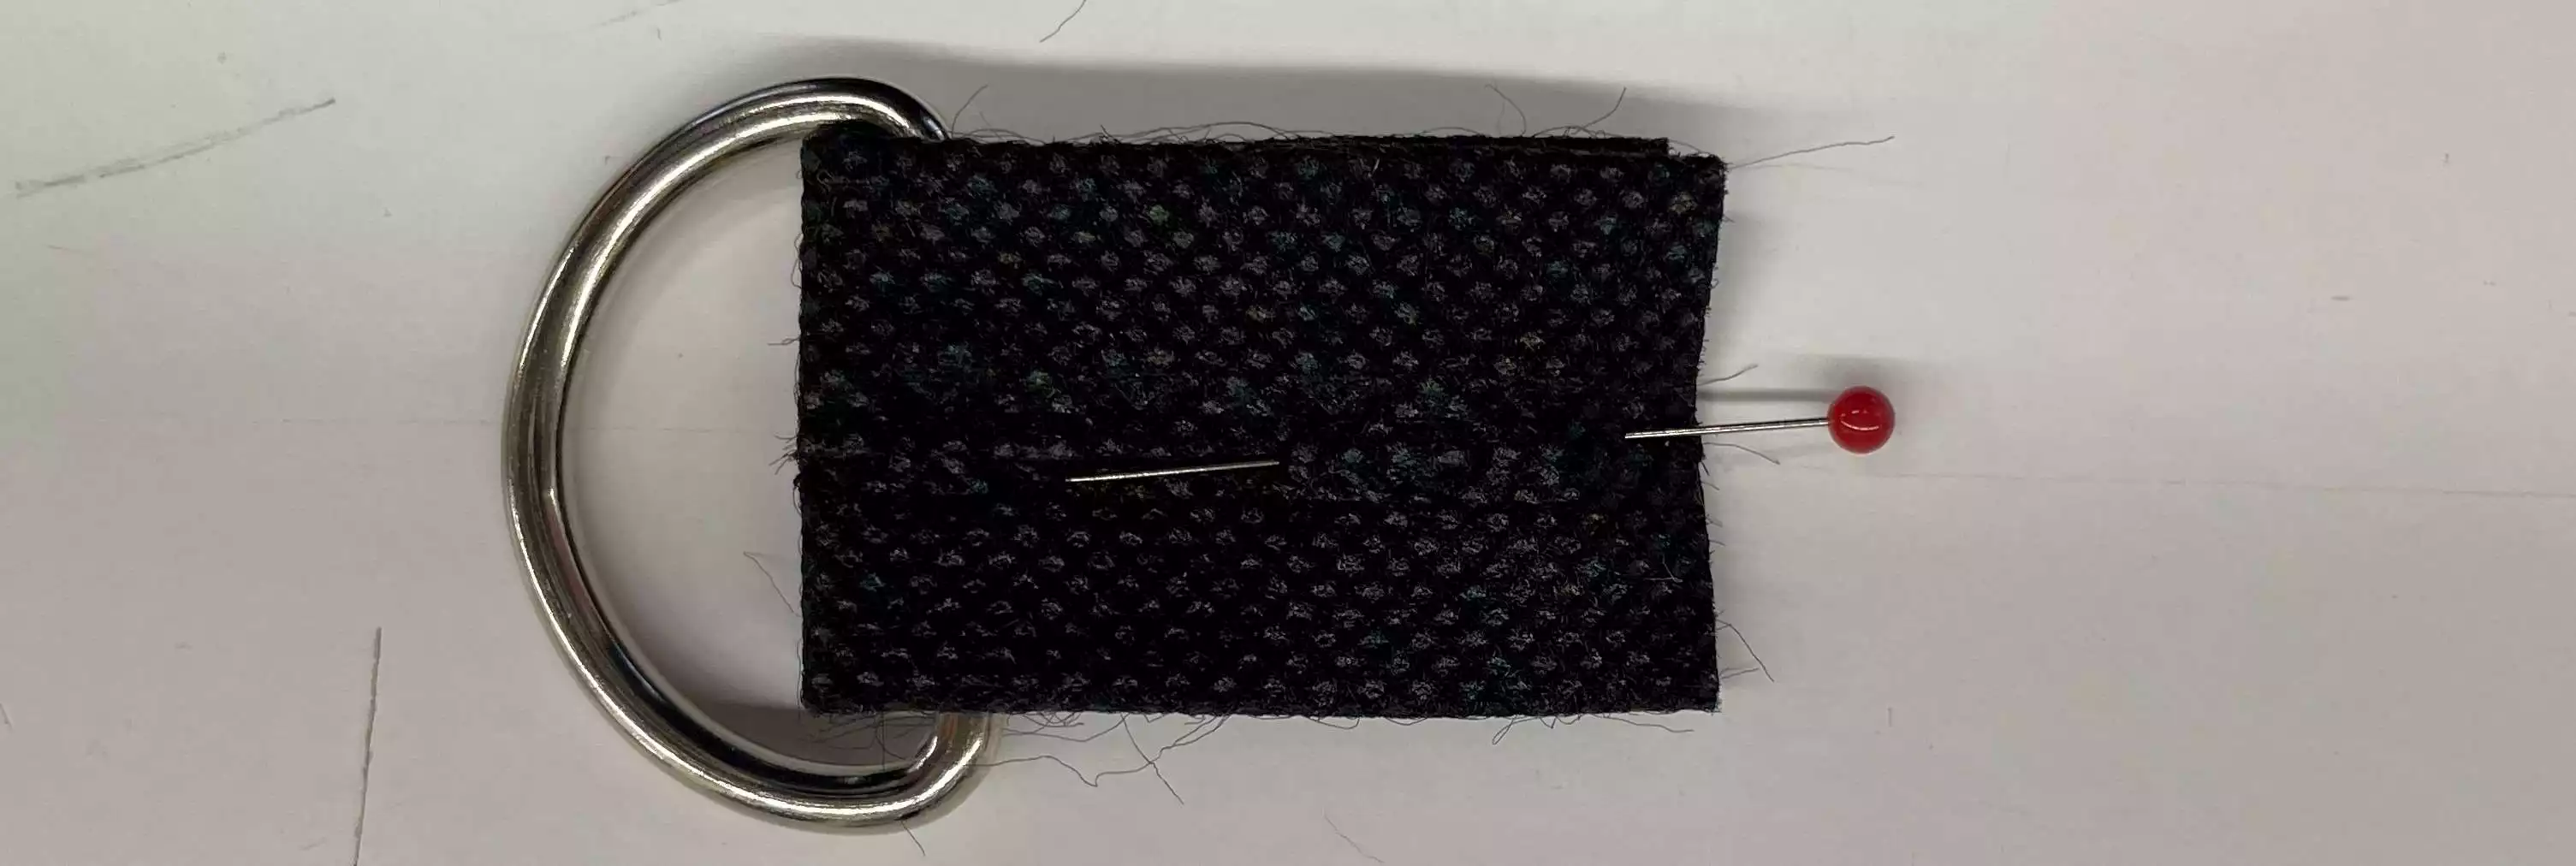 Simple-zippered-pouch-step5-folded-ends.jpg